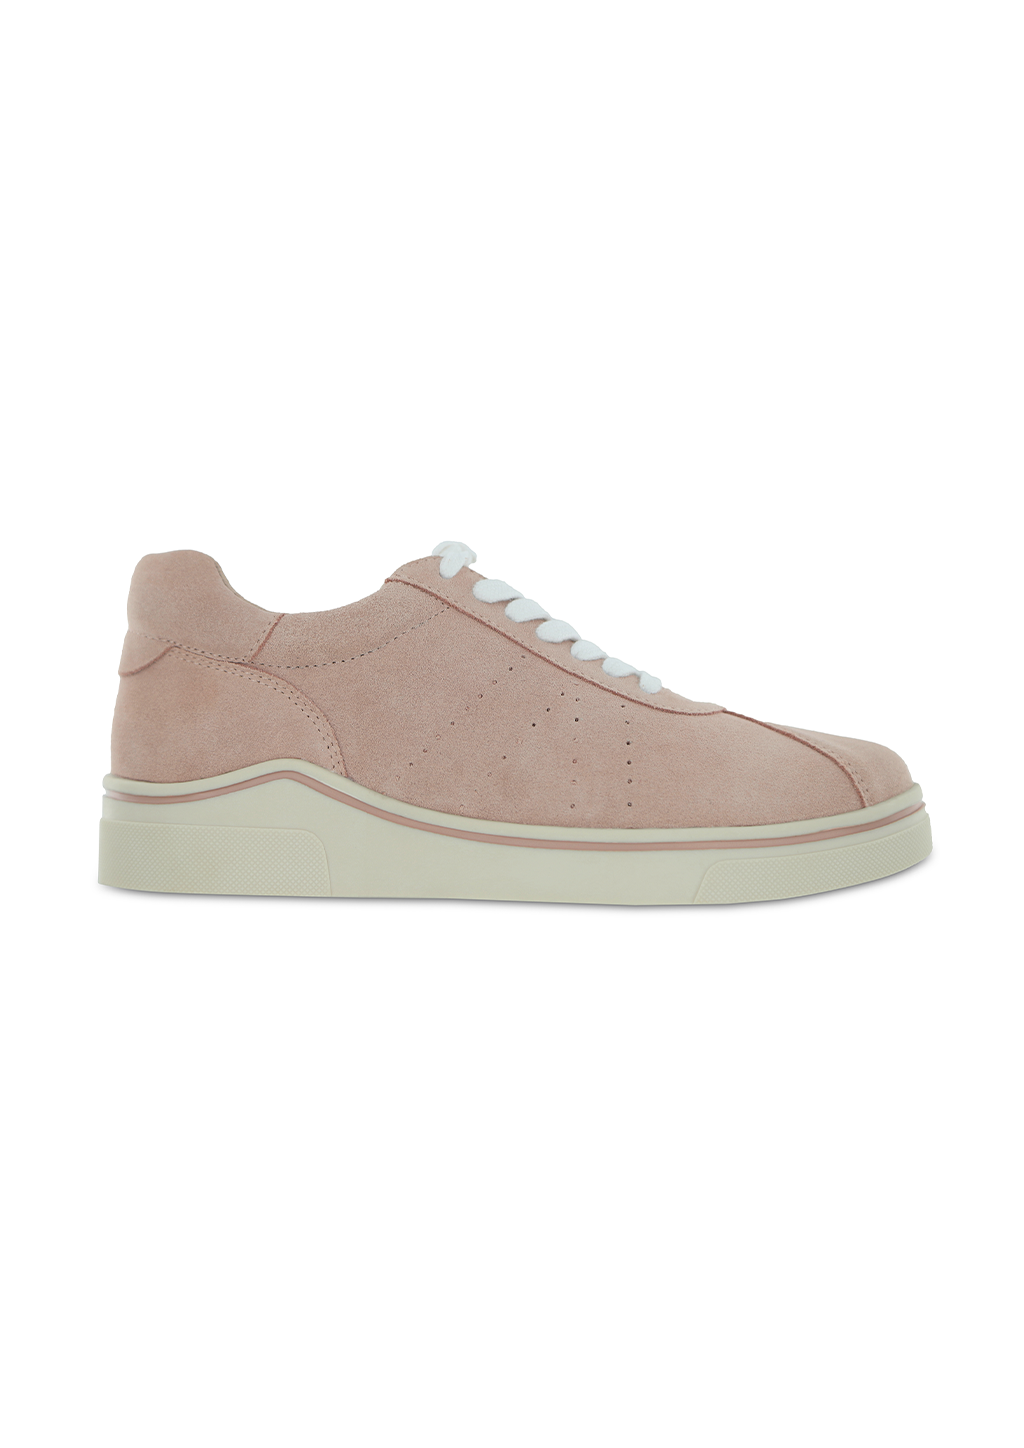 Sprint Women's Leather Sneakers